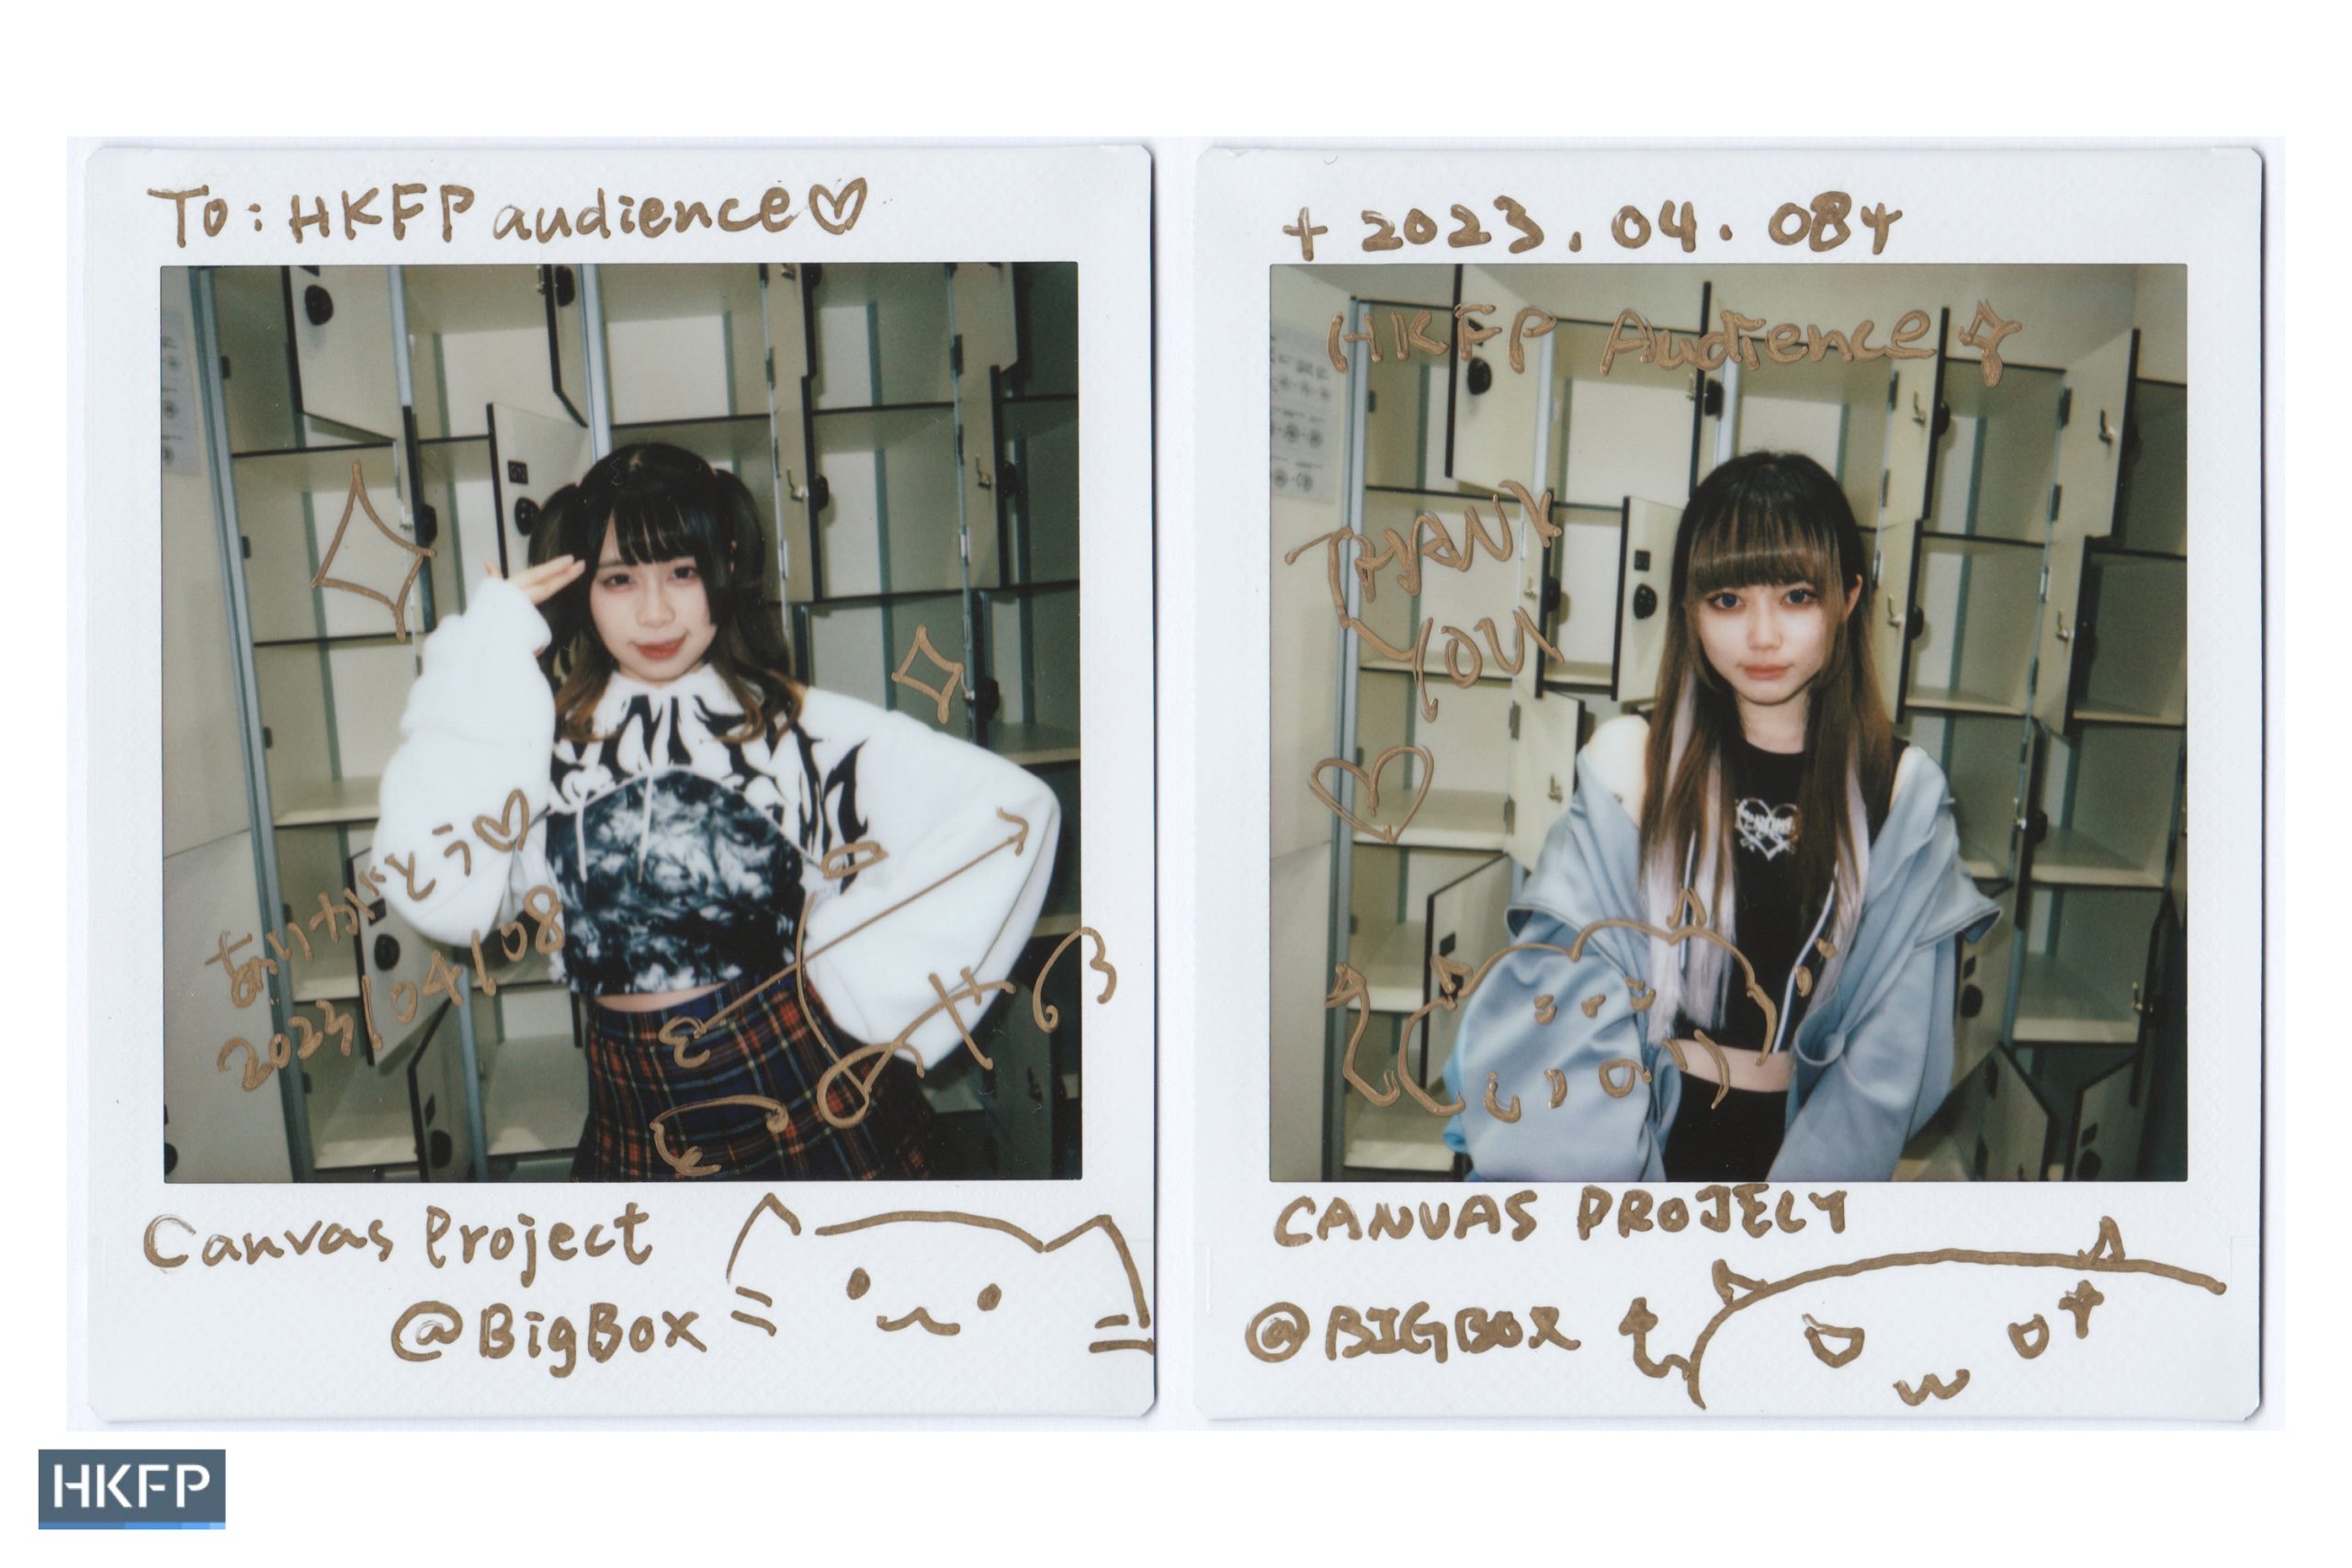 Underground idol group Otadol.HK’s instant photos for HKFP. The group was dismissed this year after the HKFP report was published. Photo: Kyle Lam/HKFP.